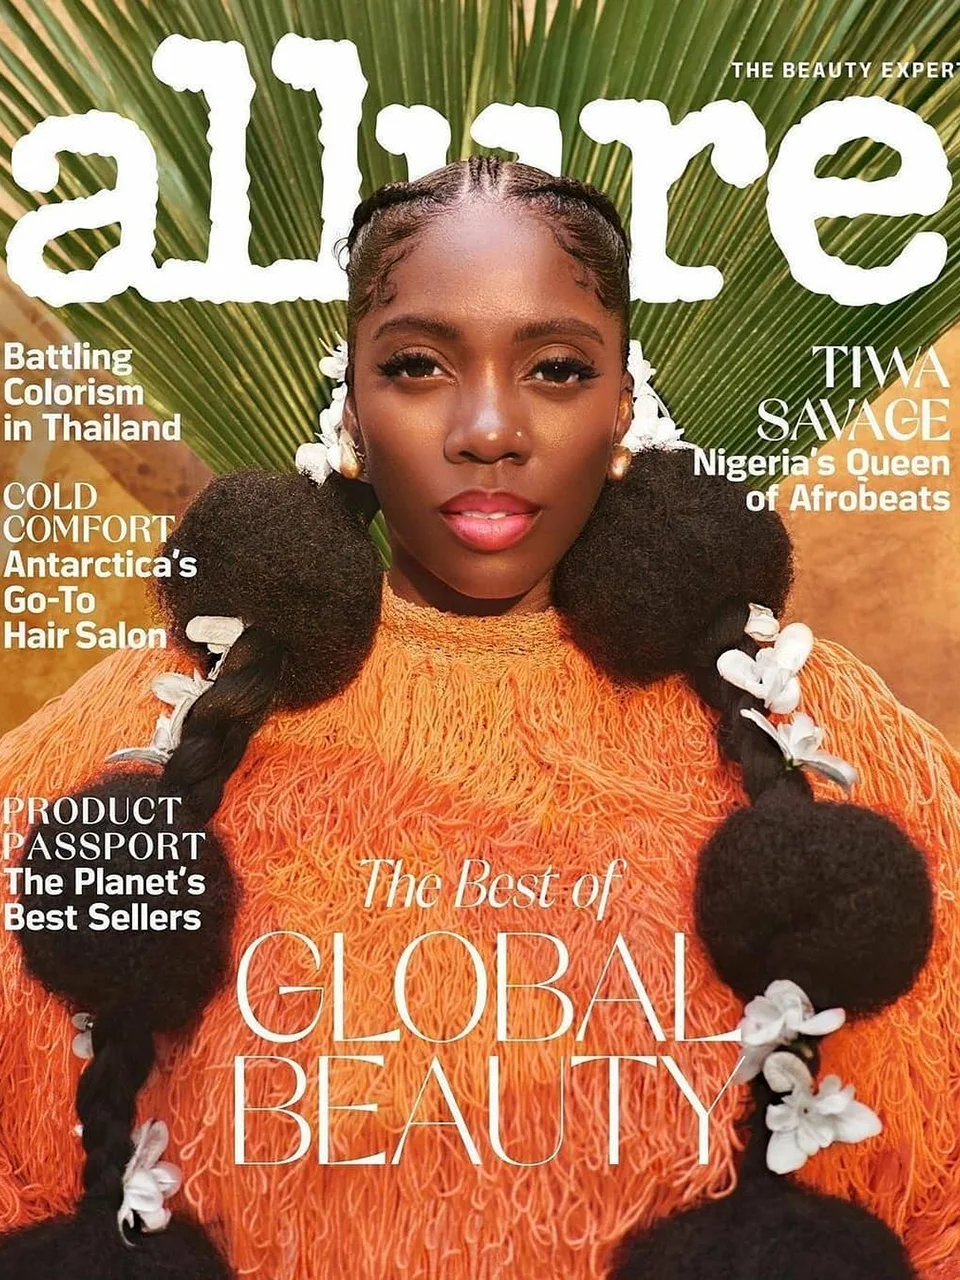 Tiwa savage cover stars for the latest issue of Allure magazine.